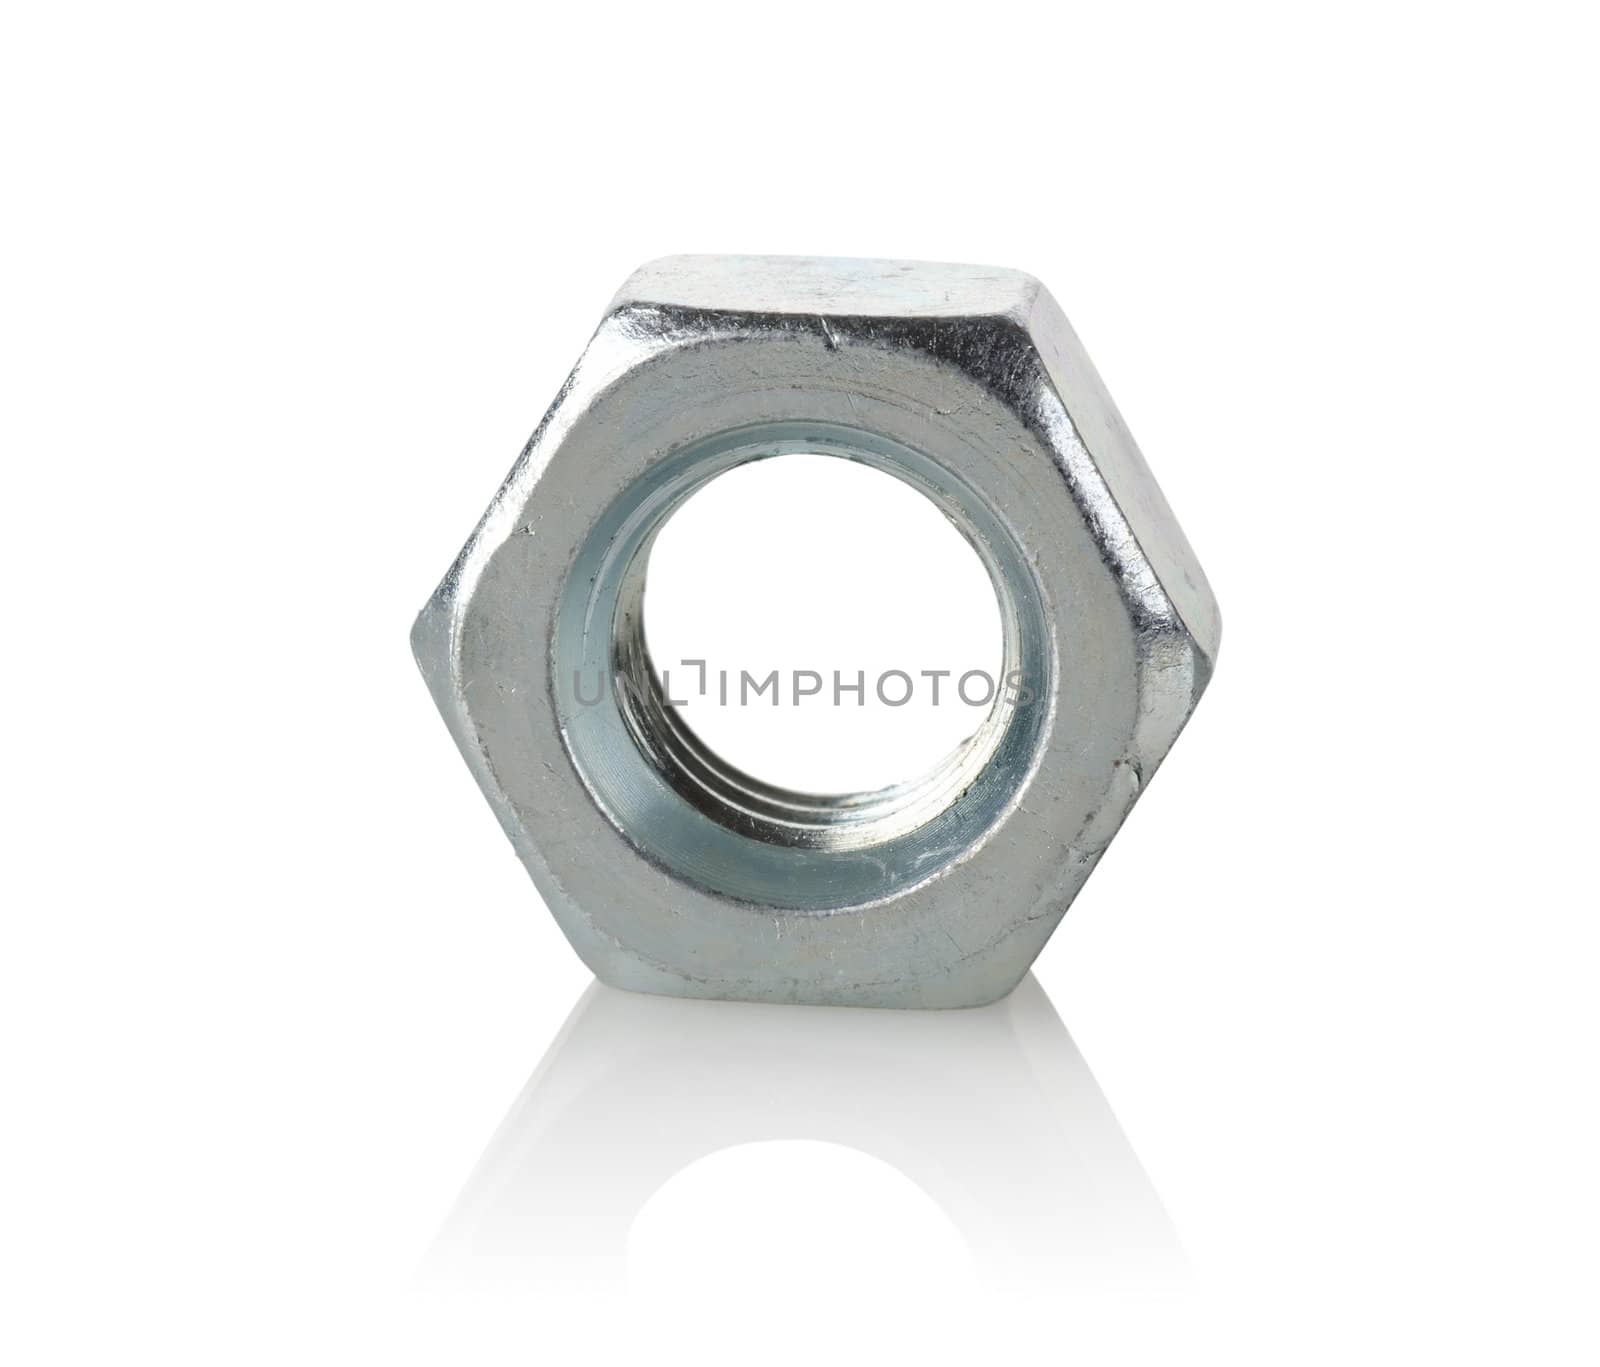 Metal nut isolated on white background